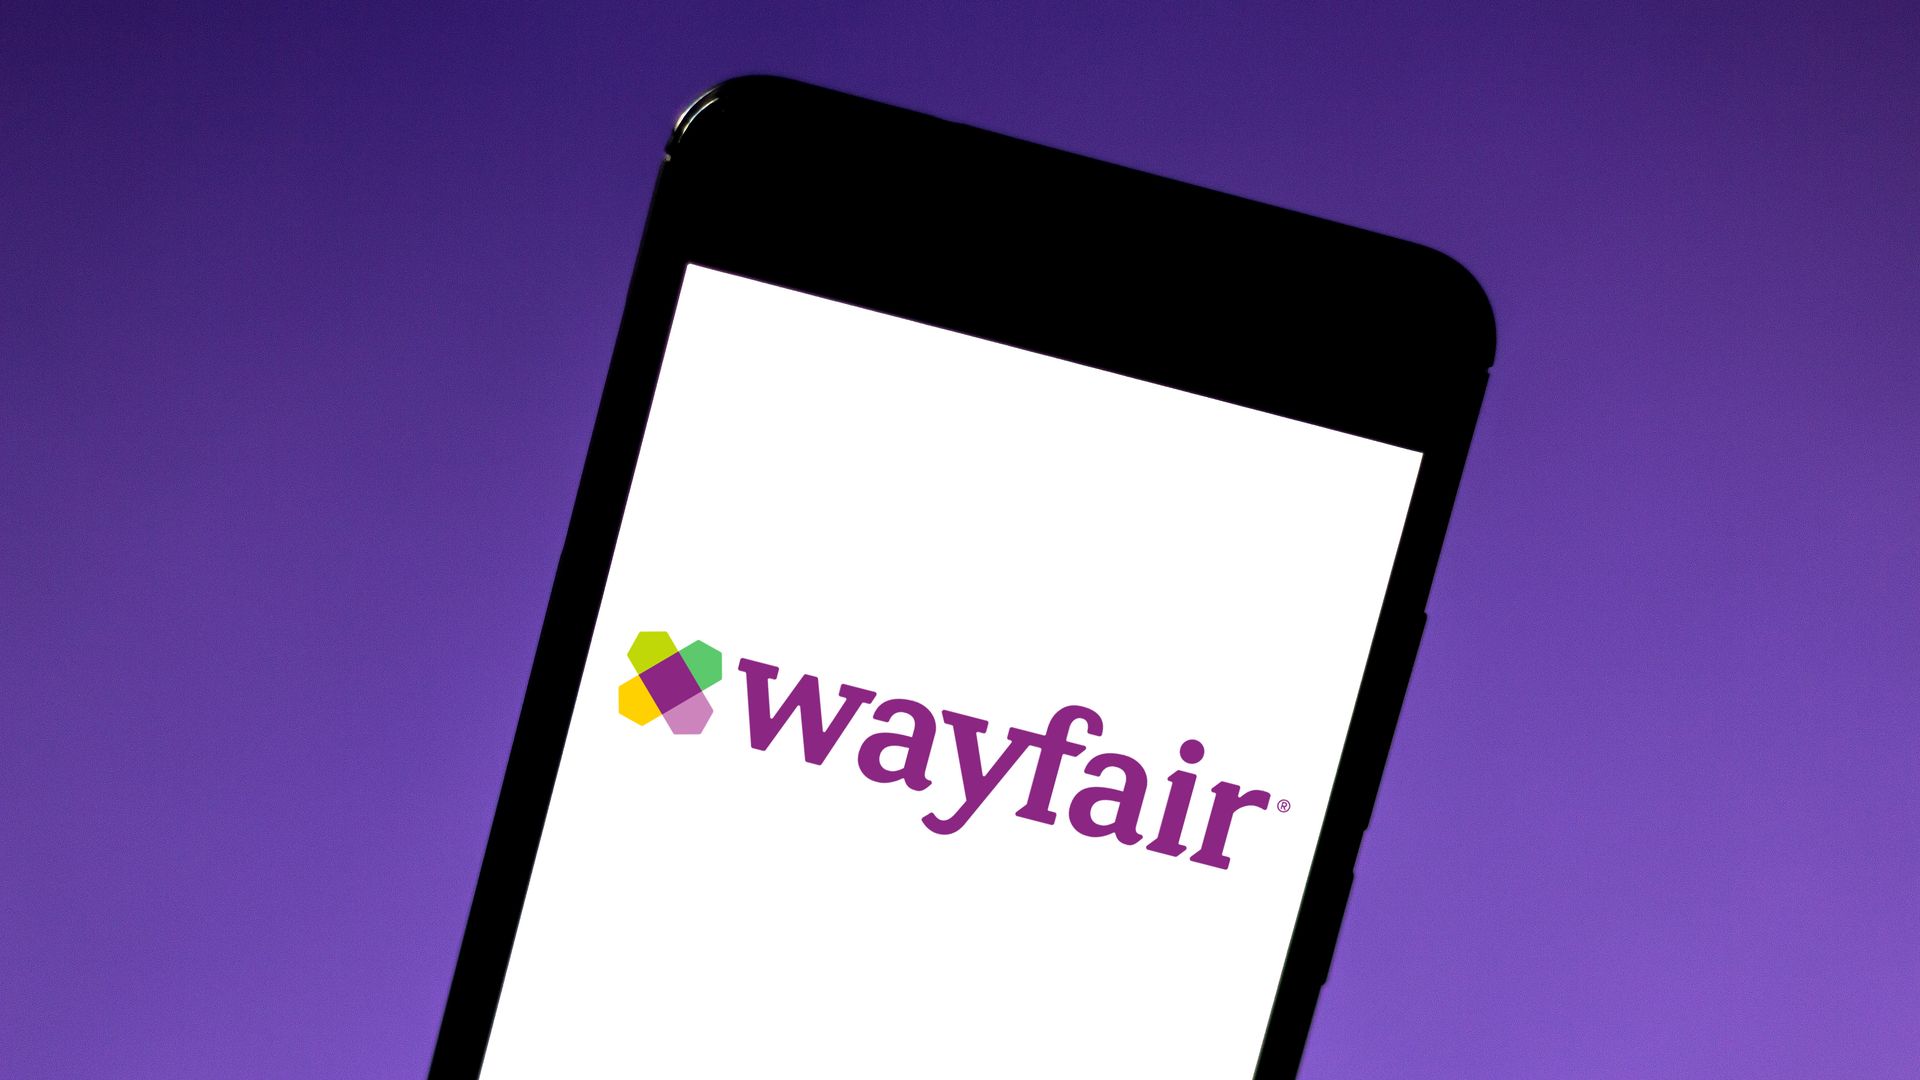 Wayfair's logo is displaced on a phone screen